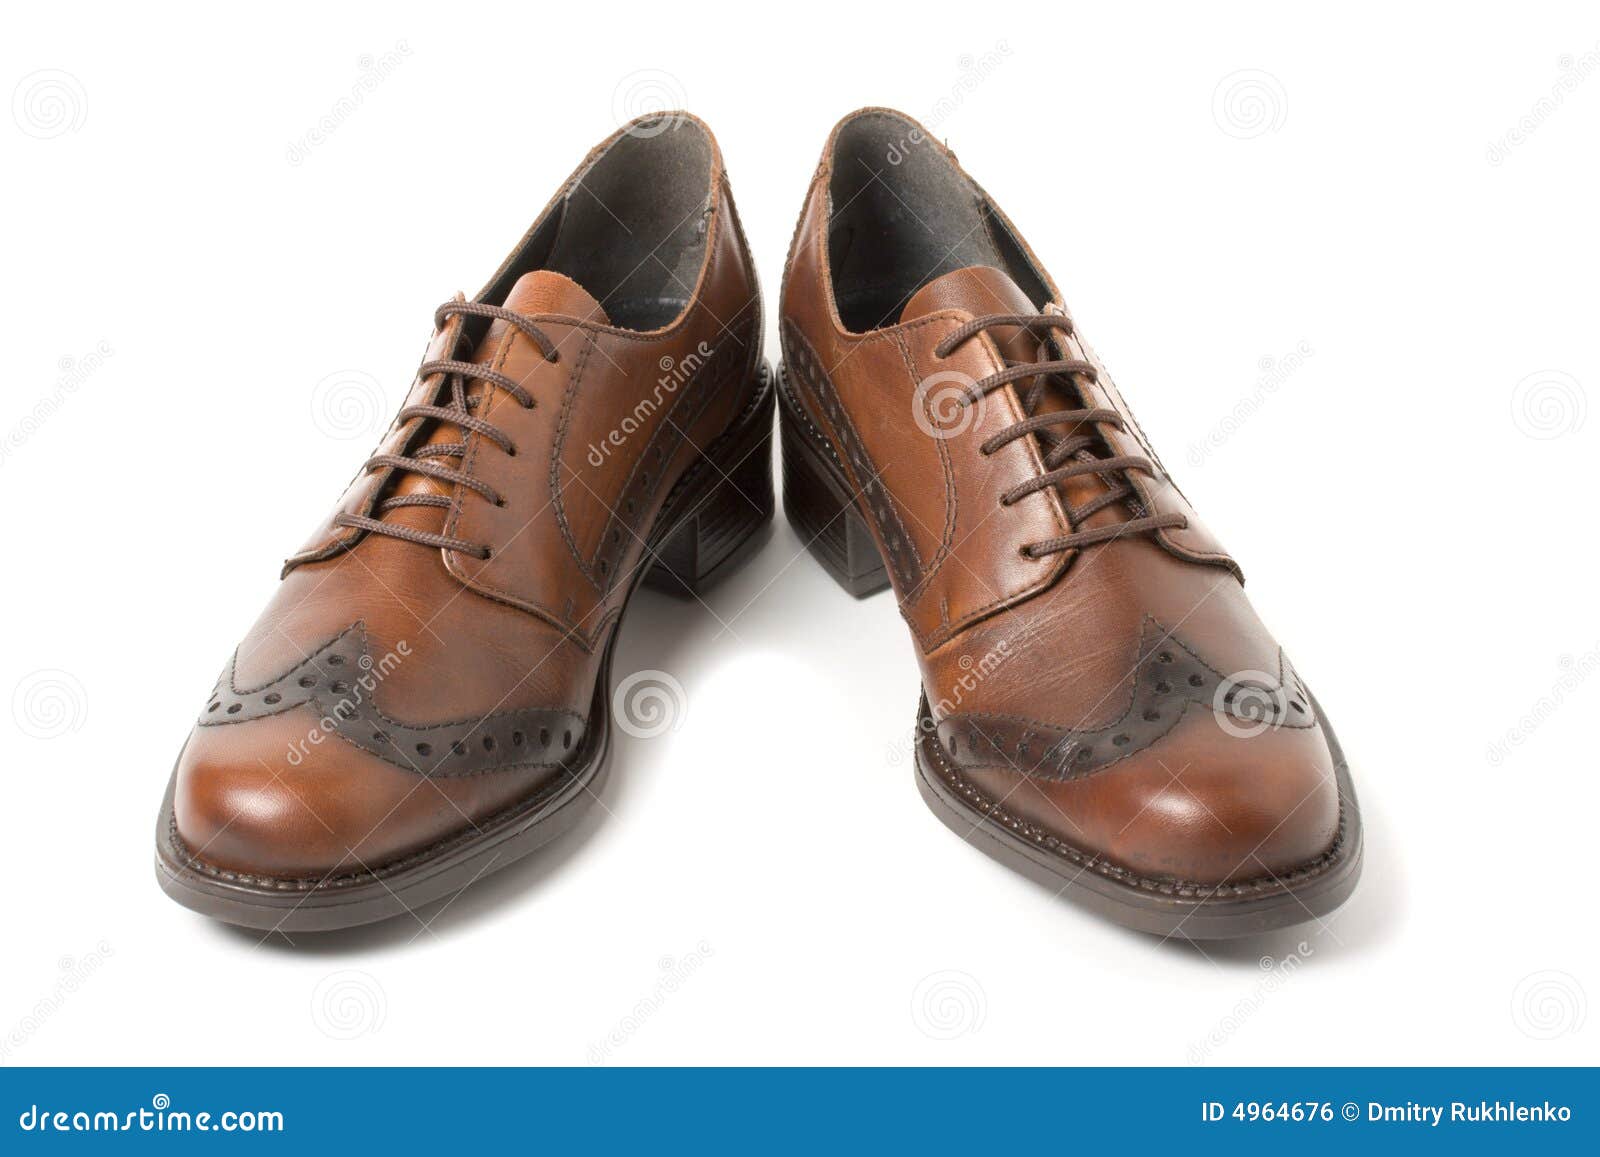 Two Brown Shoes Isolated on White Stock Photo - Image of boot, feet ...